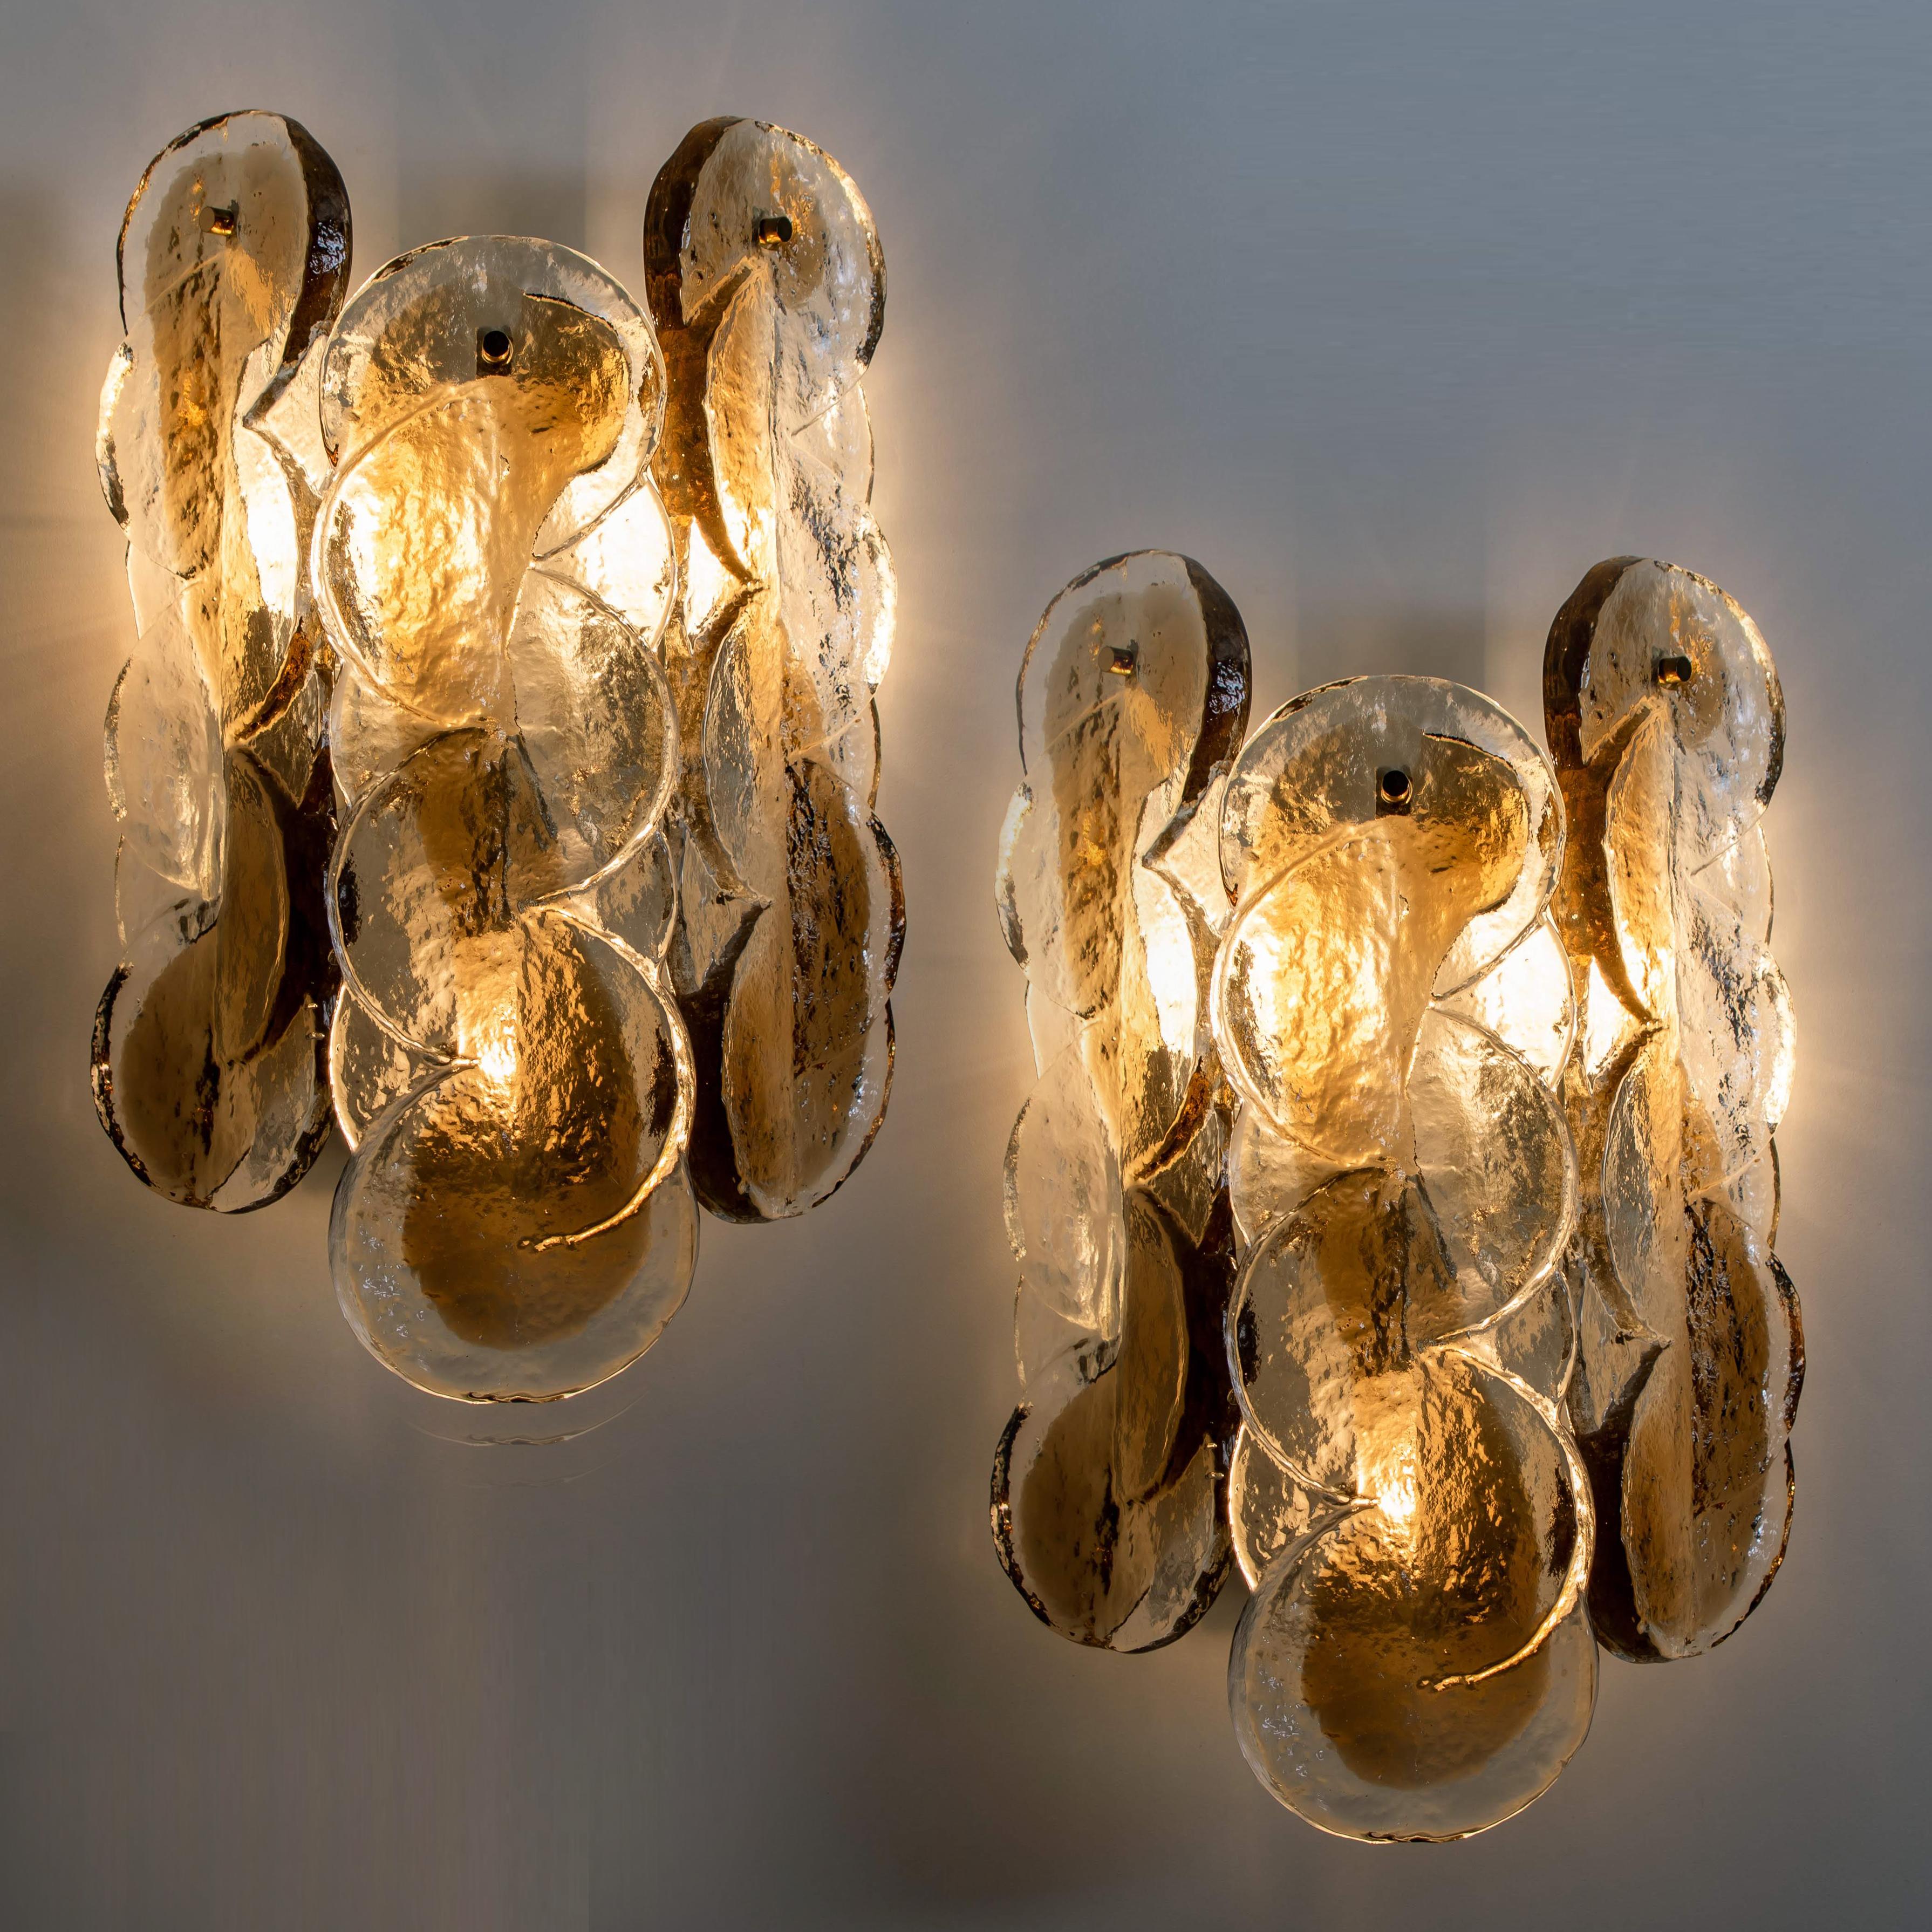 Pair of Kalmar swirl sconces wall lights with slight goldish amber color swirl. Beautiful, thick textured glass is complimented by chrome hardware. Simple and clean design. Hand blown melting glass, made of smoked and clear glass. High quality